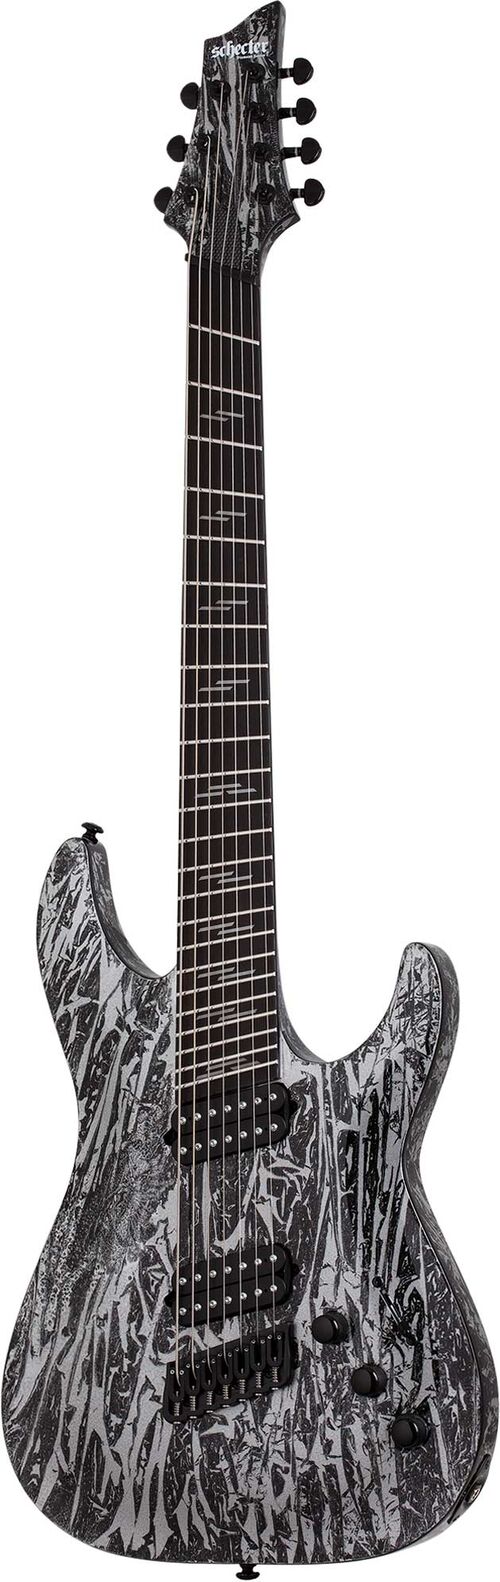 C-7 Ms Silver Moutain Svm Schecter